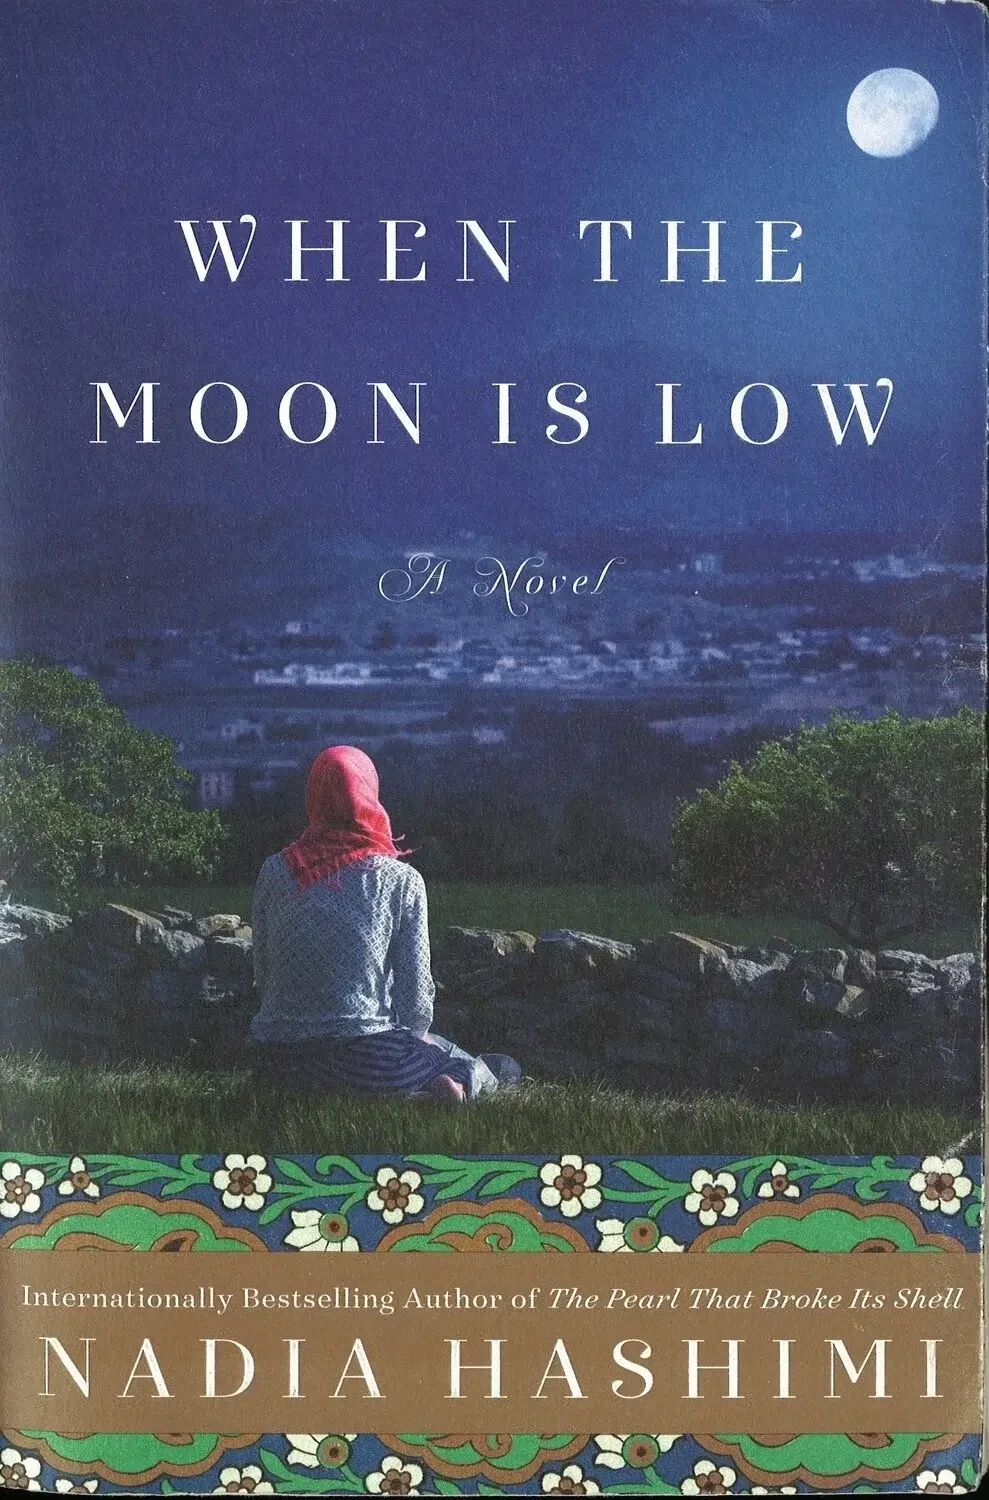 When The Moon Is Low by Nadia Hashimi